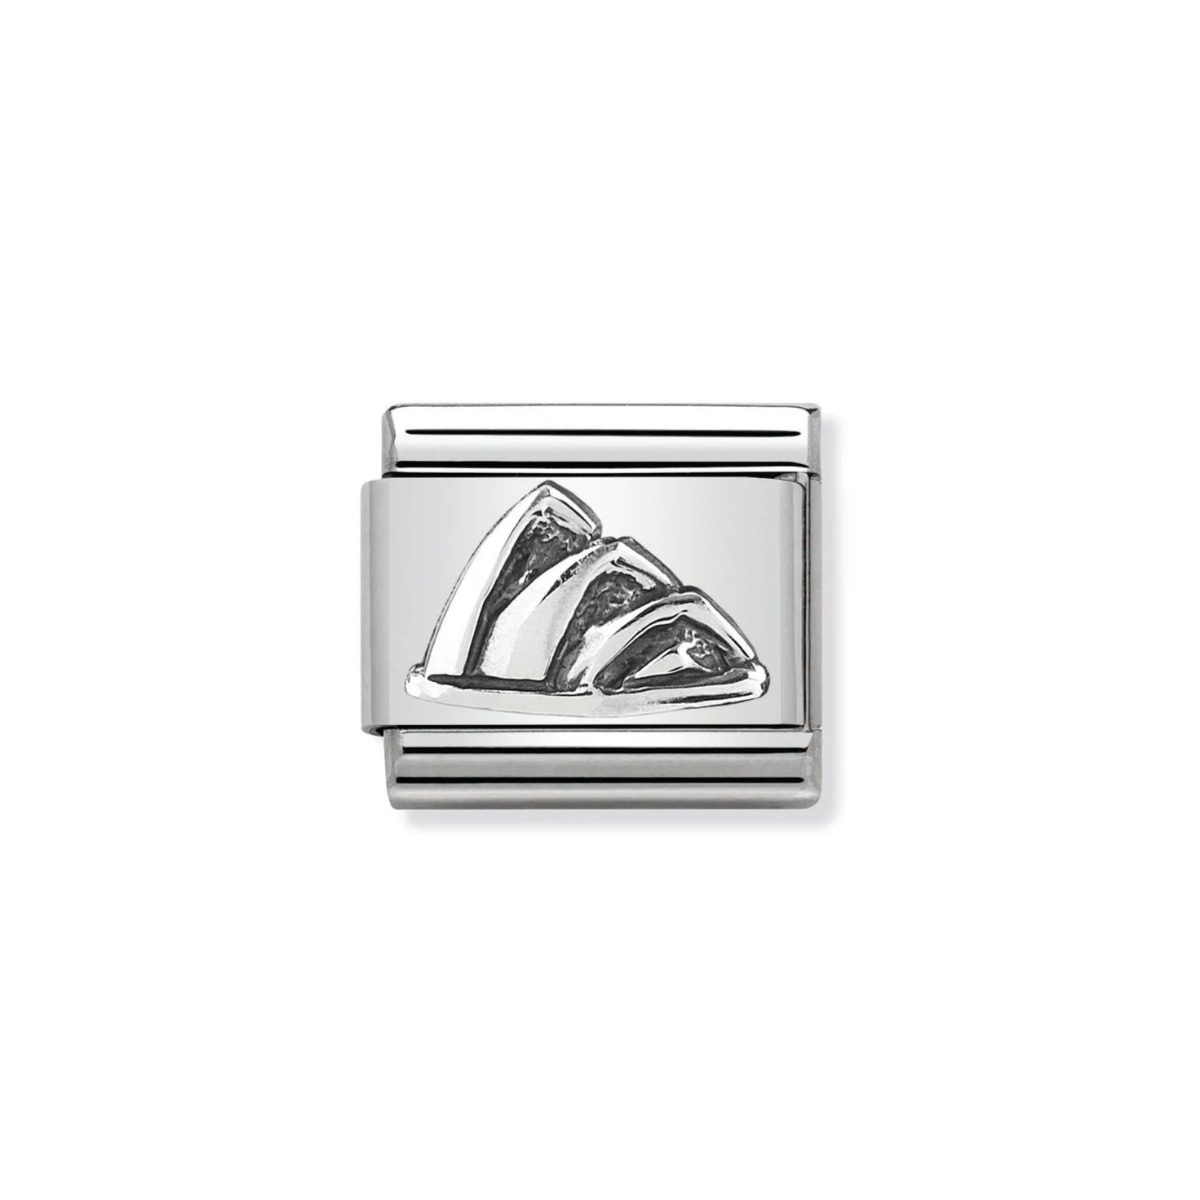 Nomination Classic Monuments Silver Opera House Charm